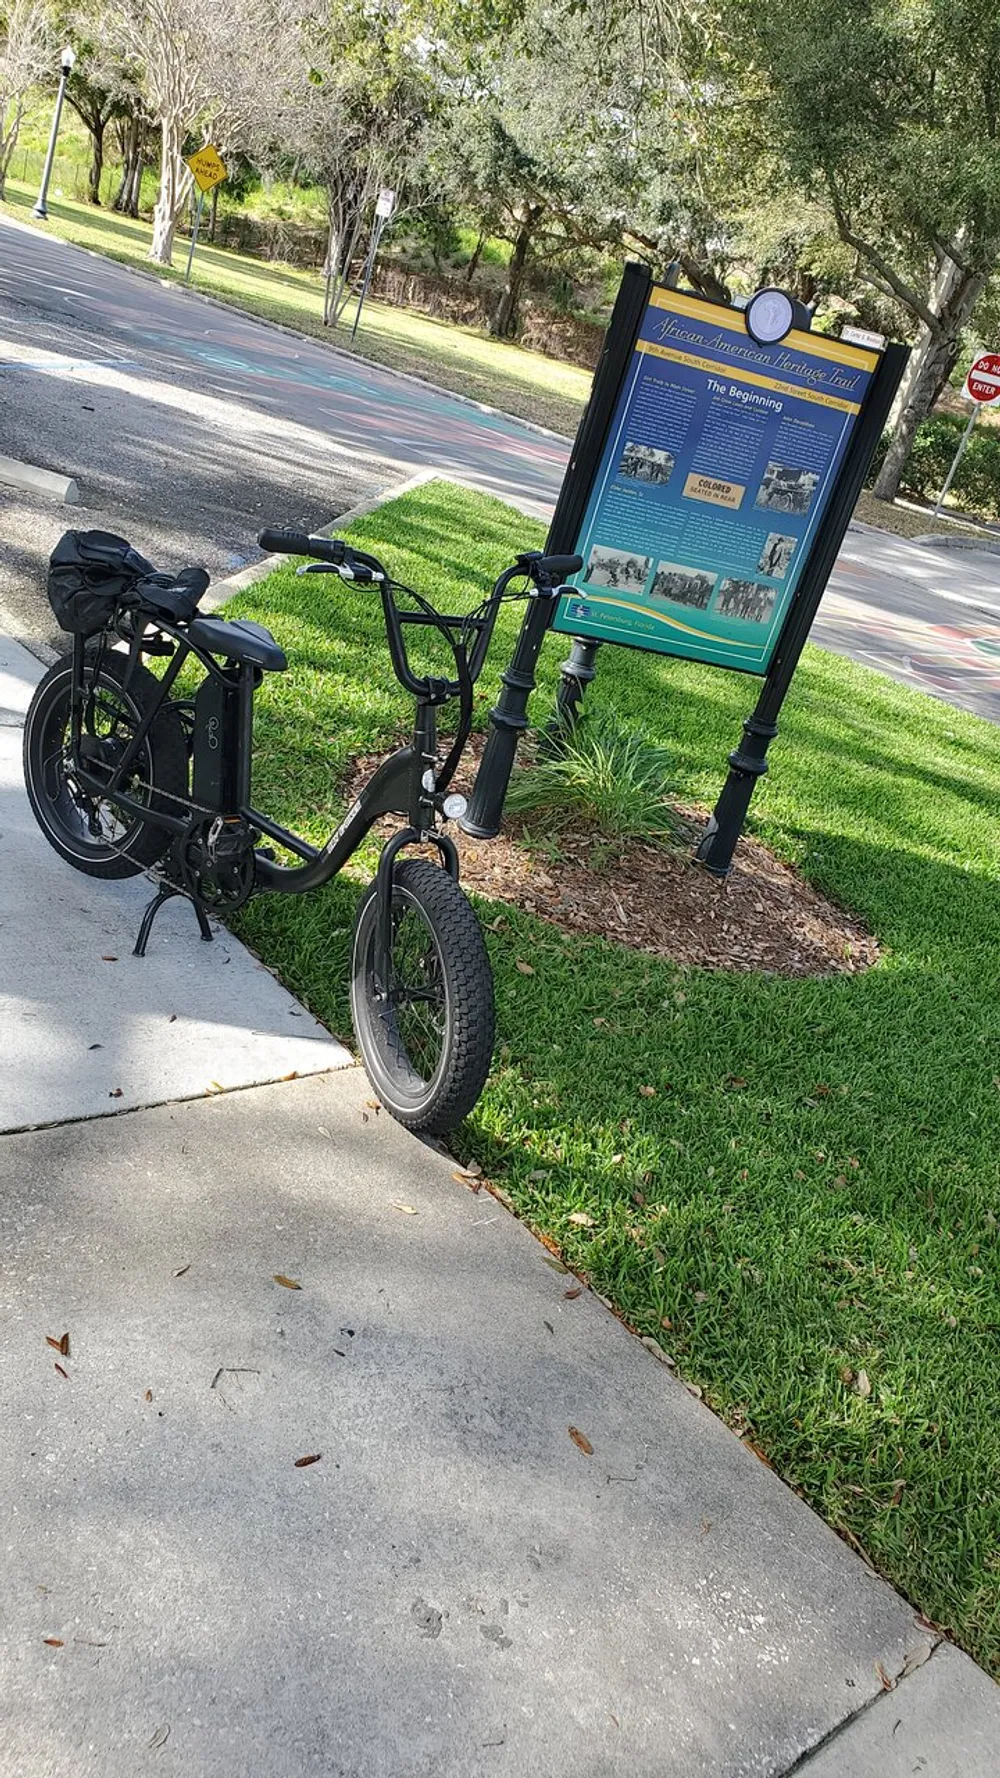 An electric bicycle is parked beside an informational signpost about the African American Heritage Trail